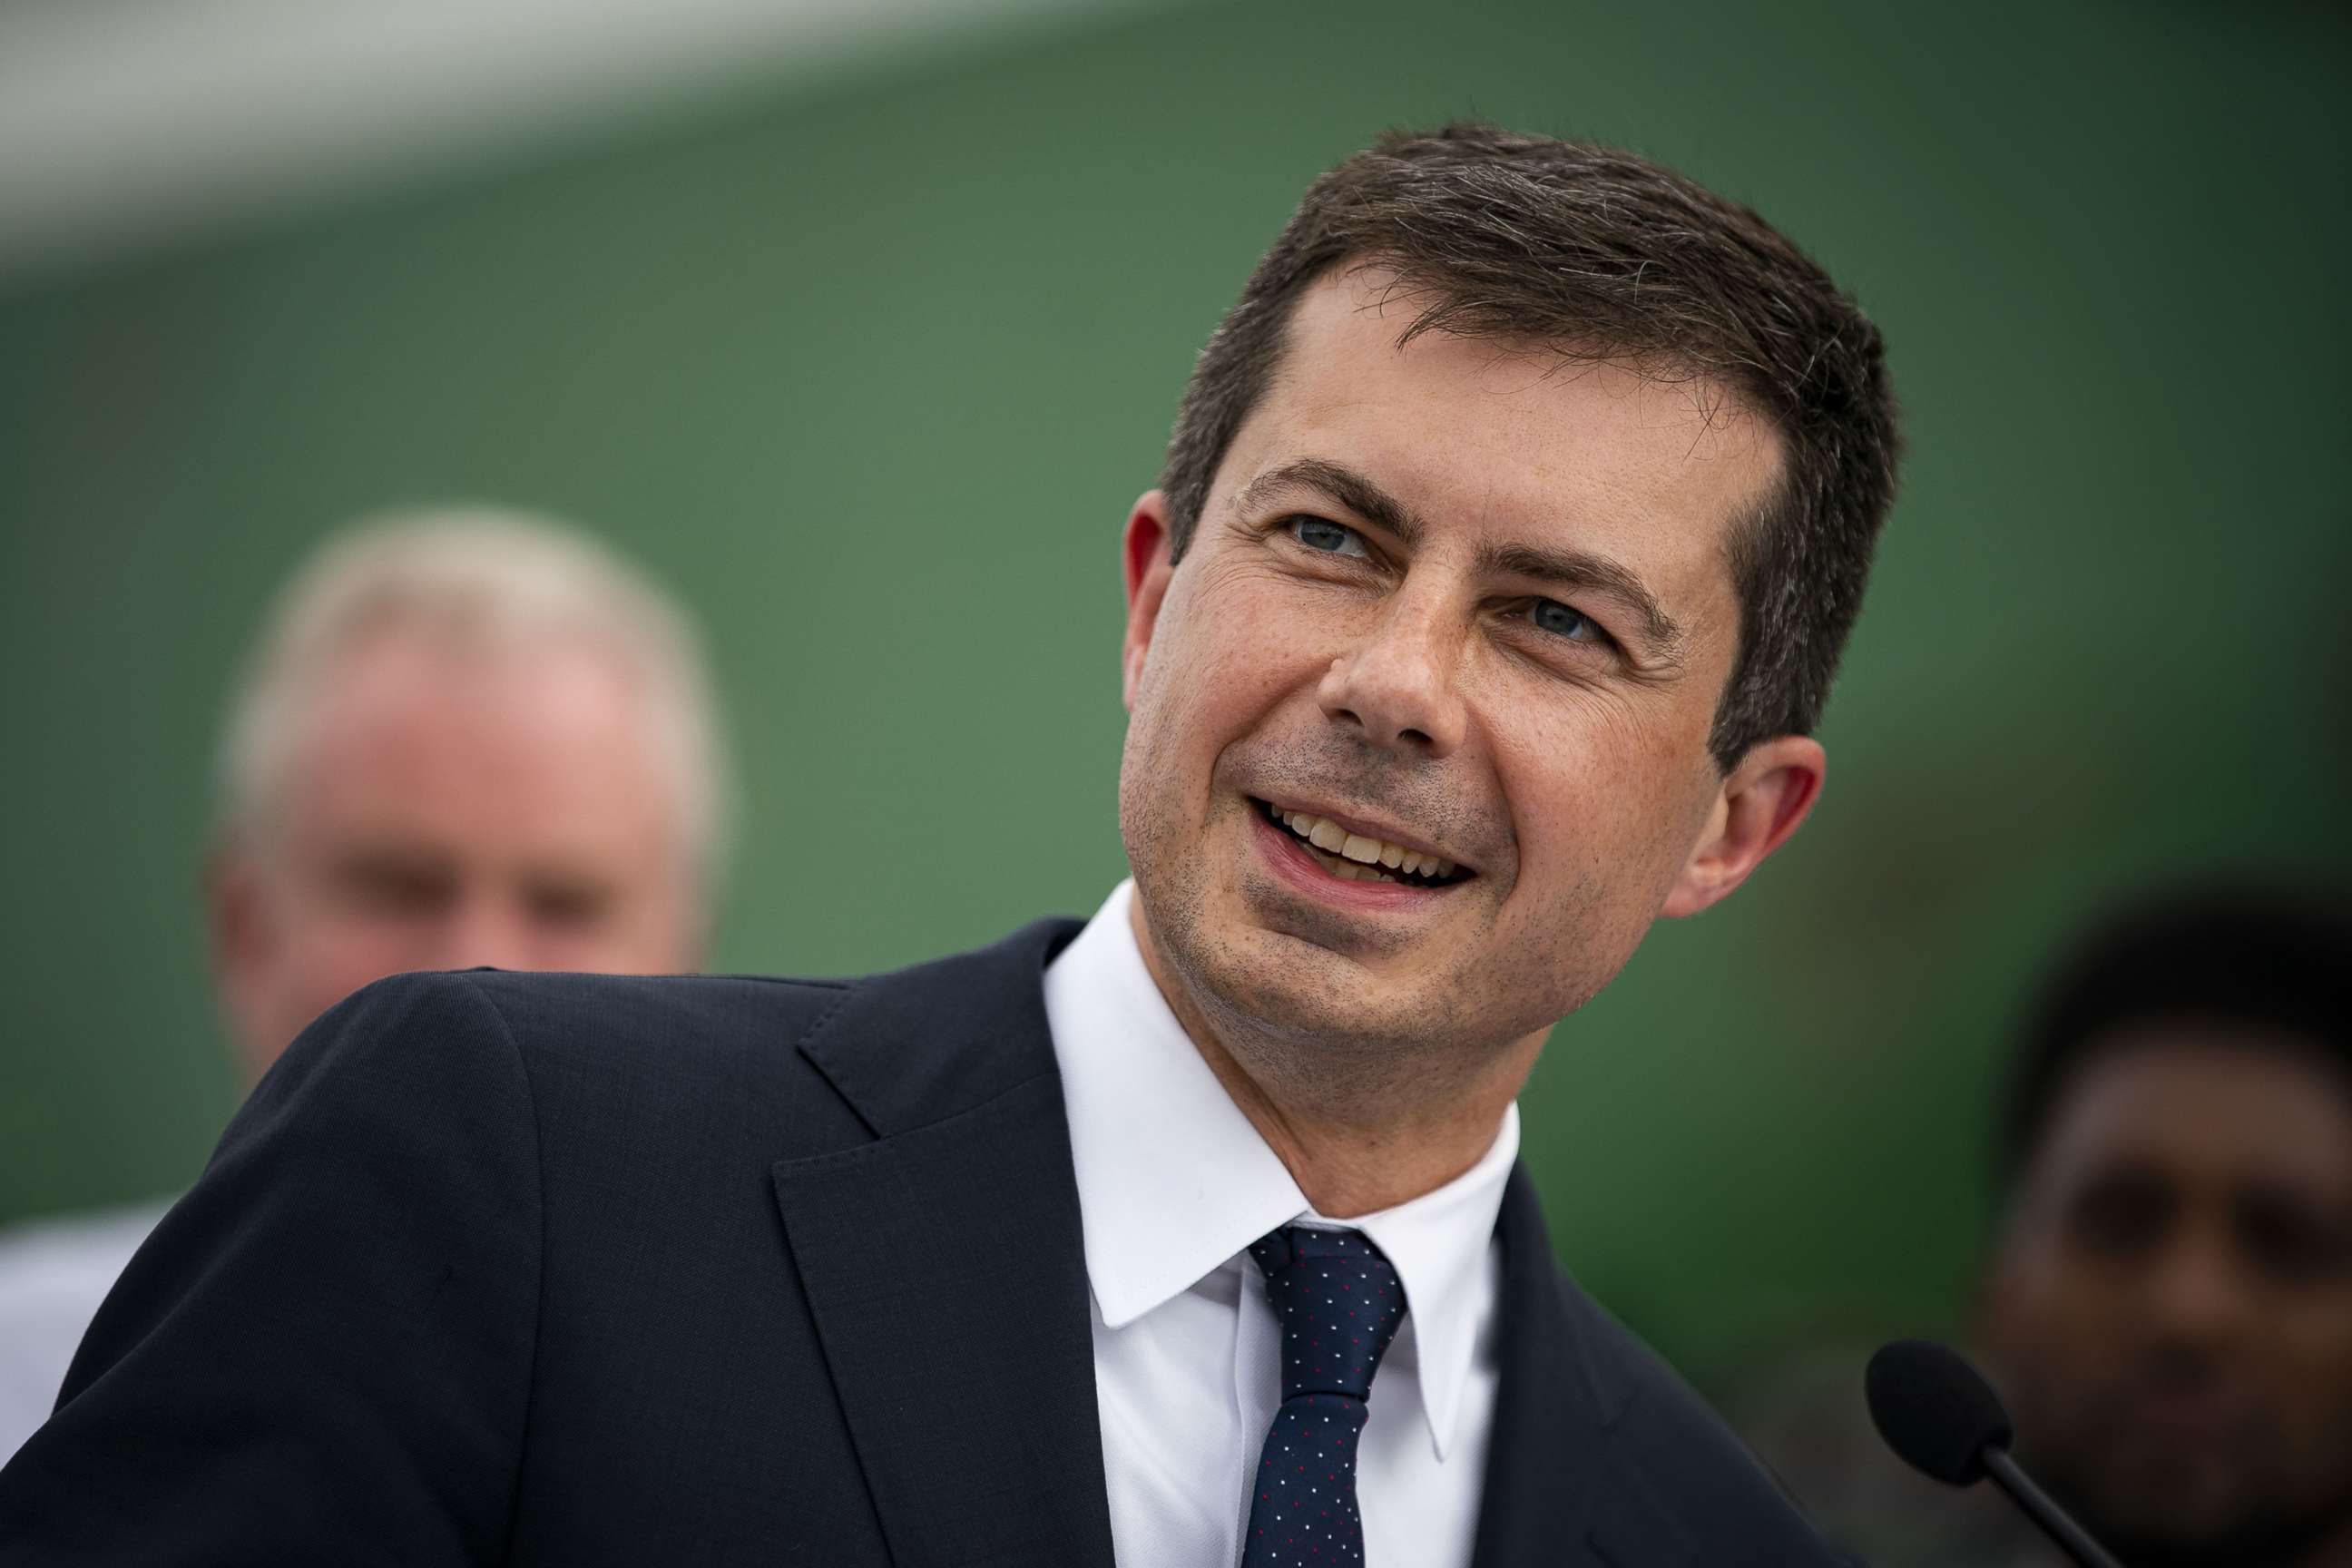 PHOTO: Pete Buttigieg, U.S. secretary of transportation, speaks during a news conference at the Port of Baltimore, Md., U.S., July 29, 2021.